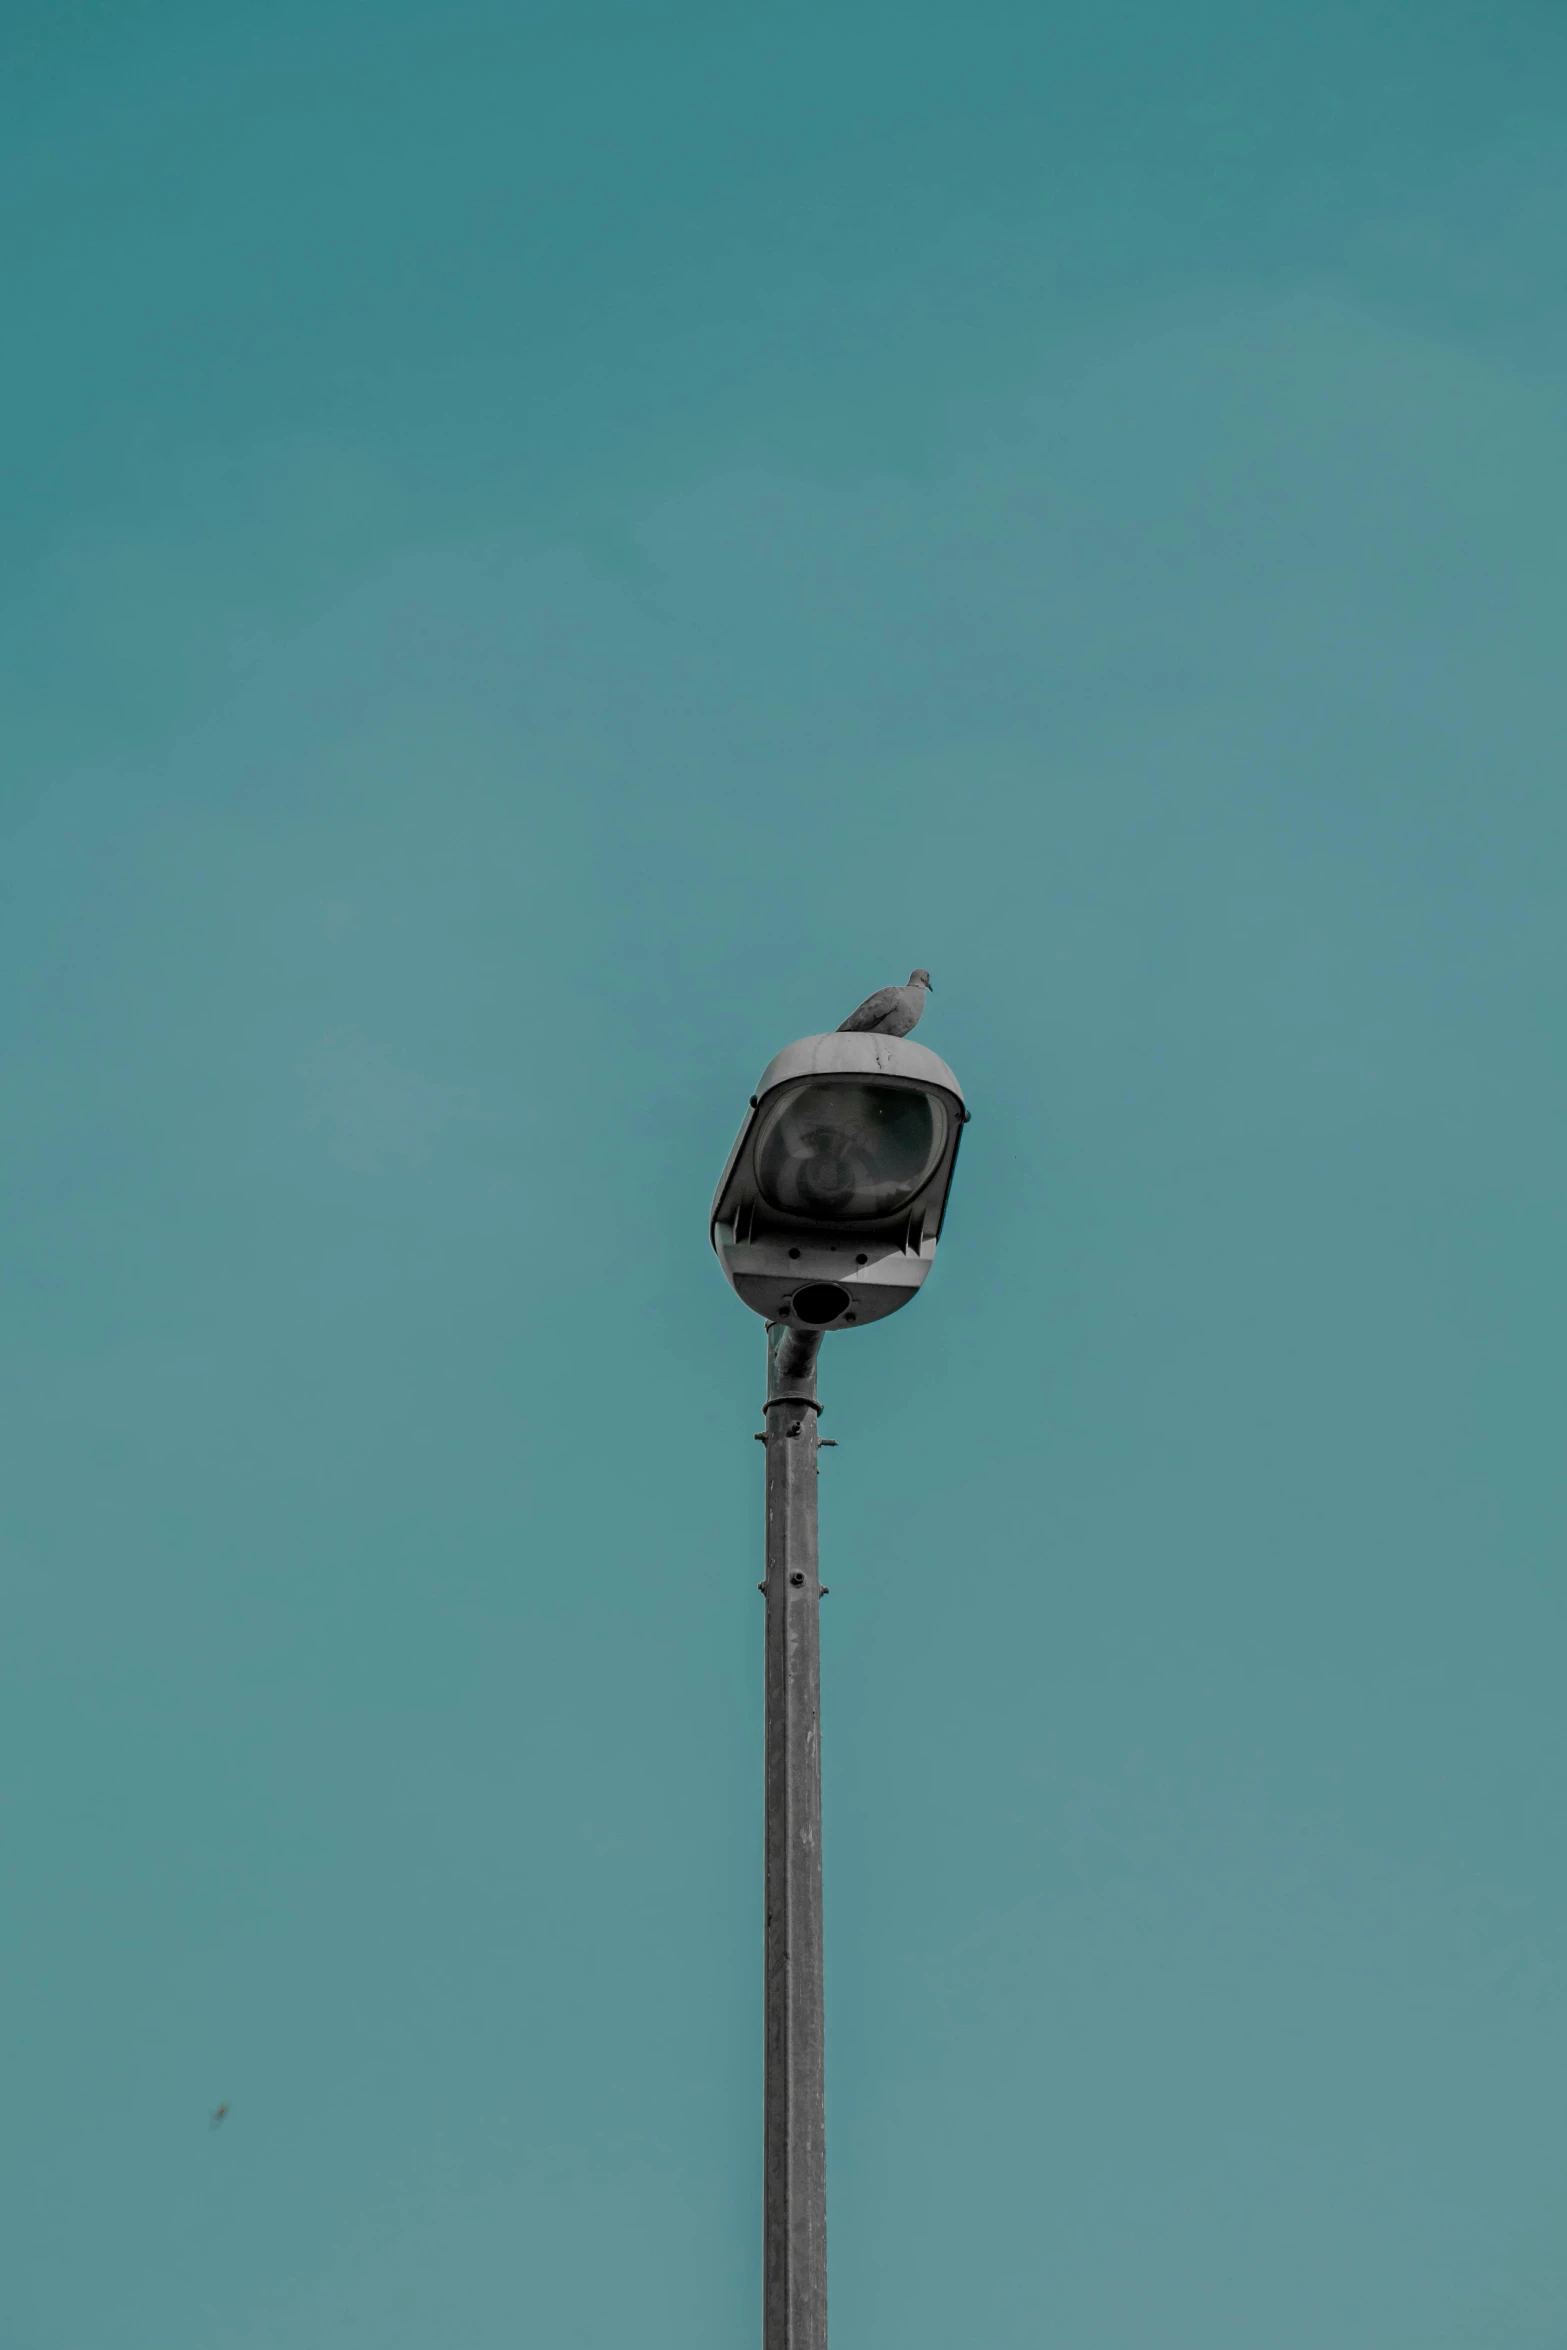 a small bird perched atop a traffic light